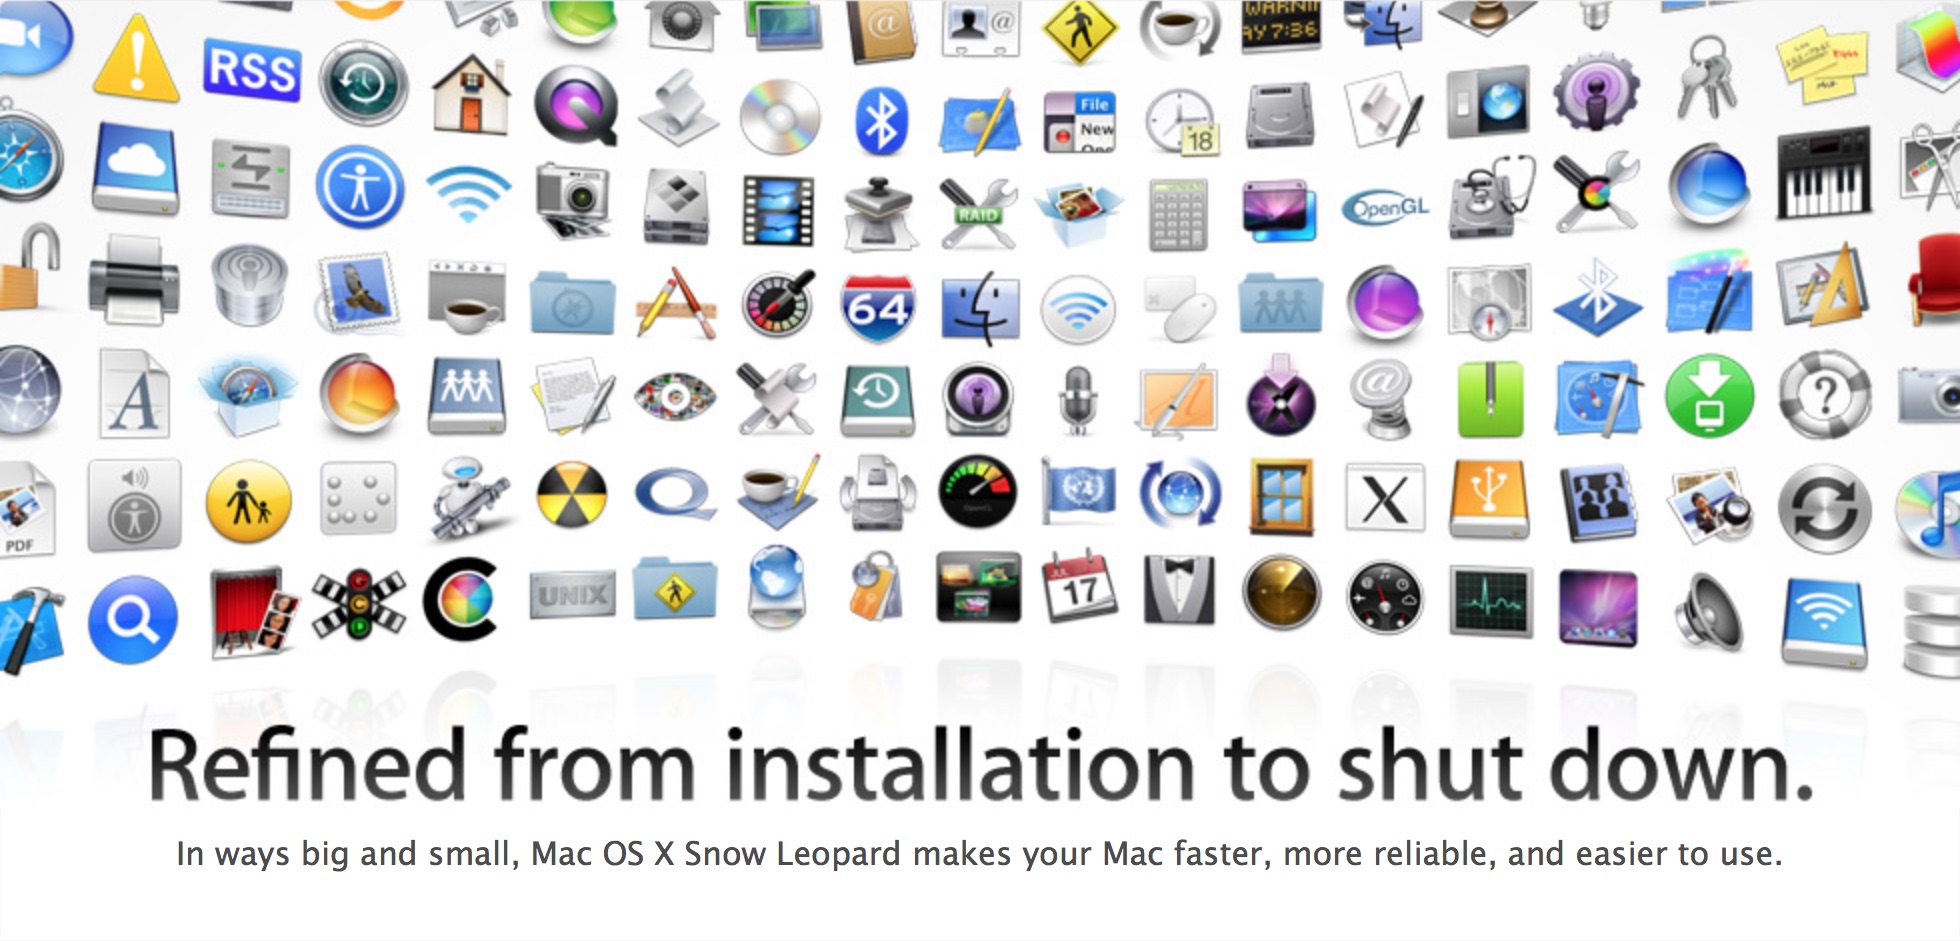 change the image for an app on mac os x 10.6.8